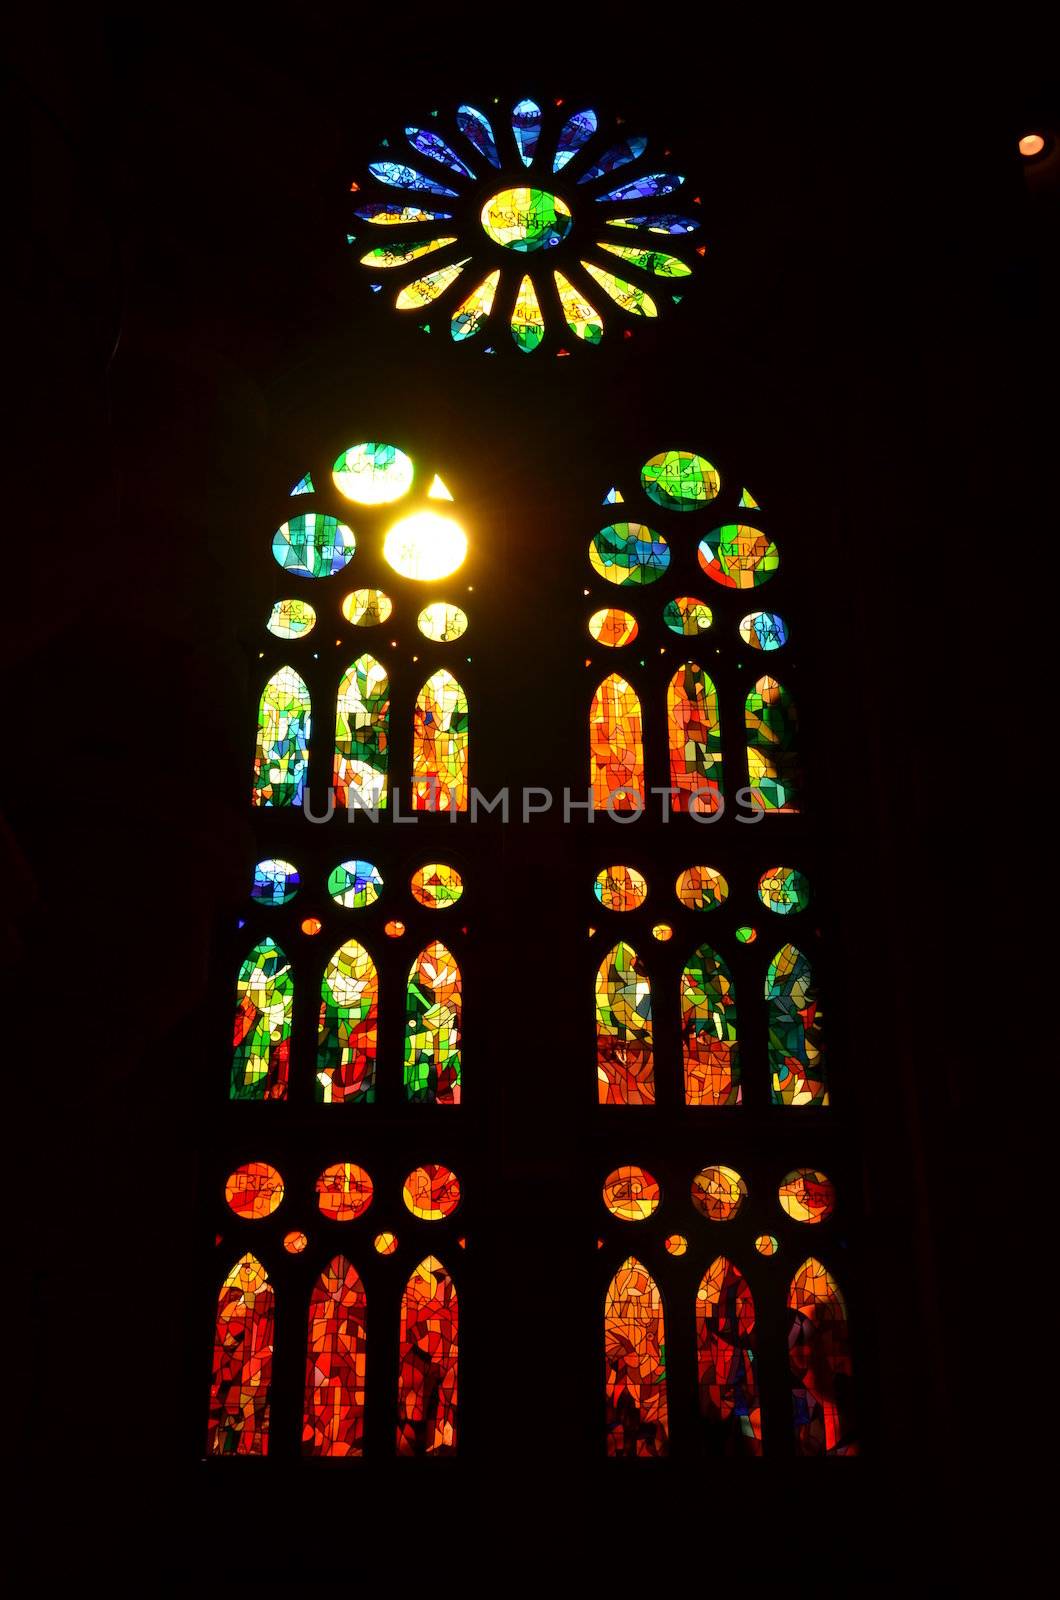 Stained glass window by bunsview